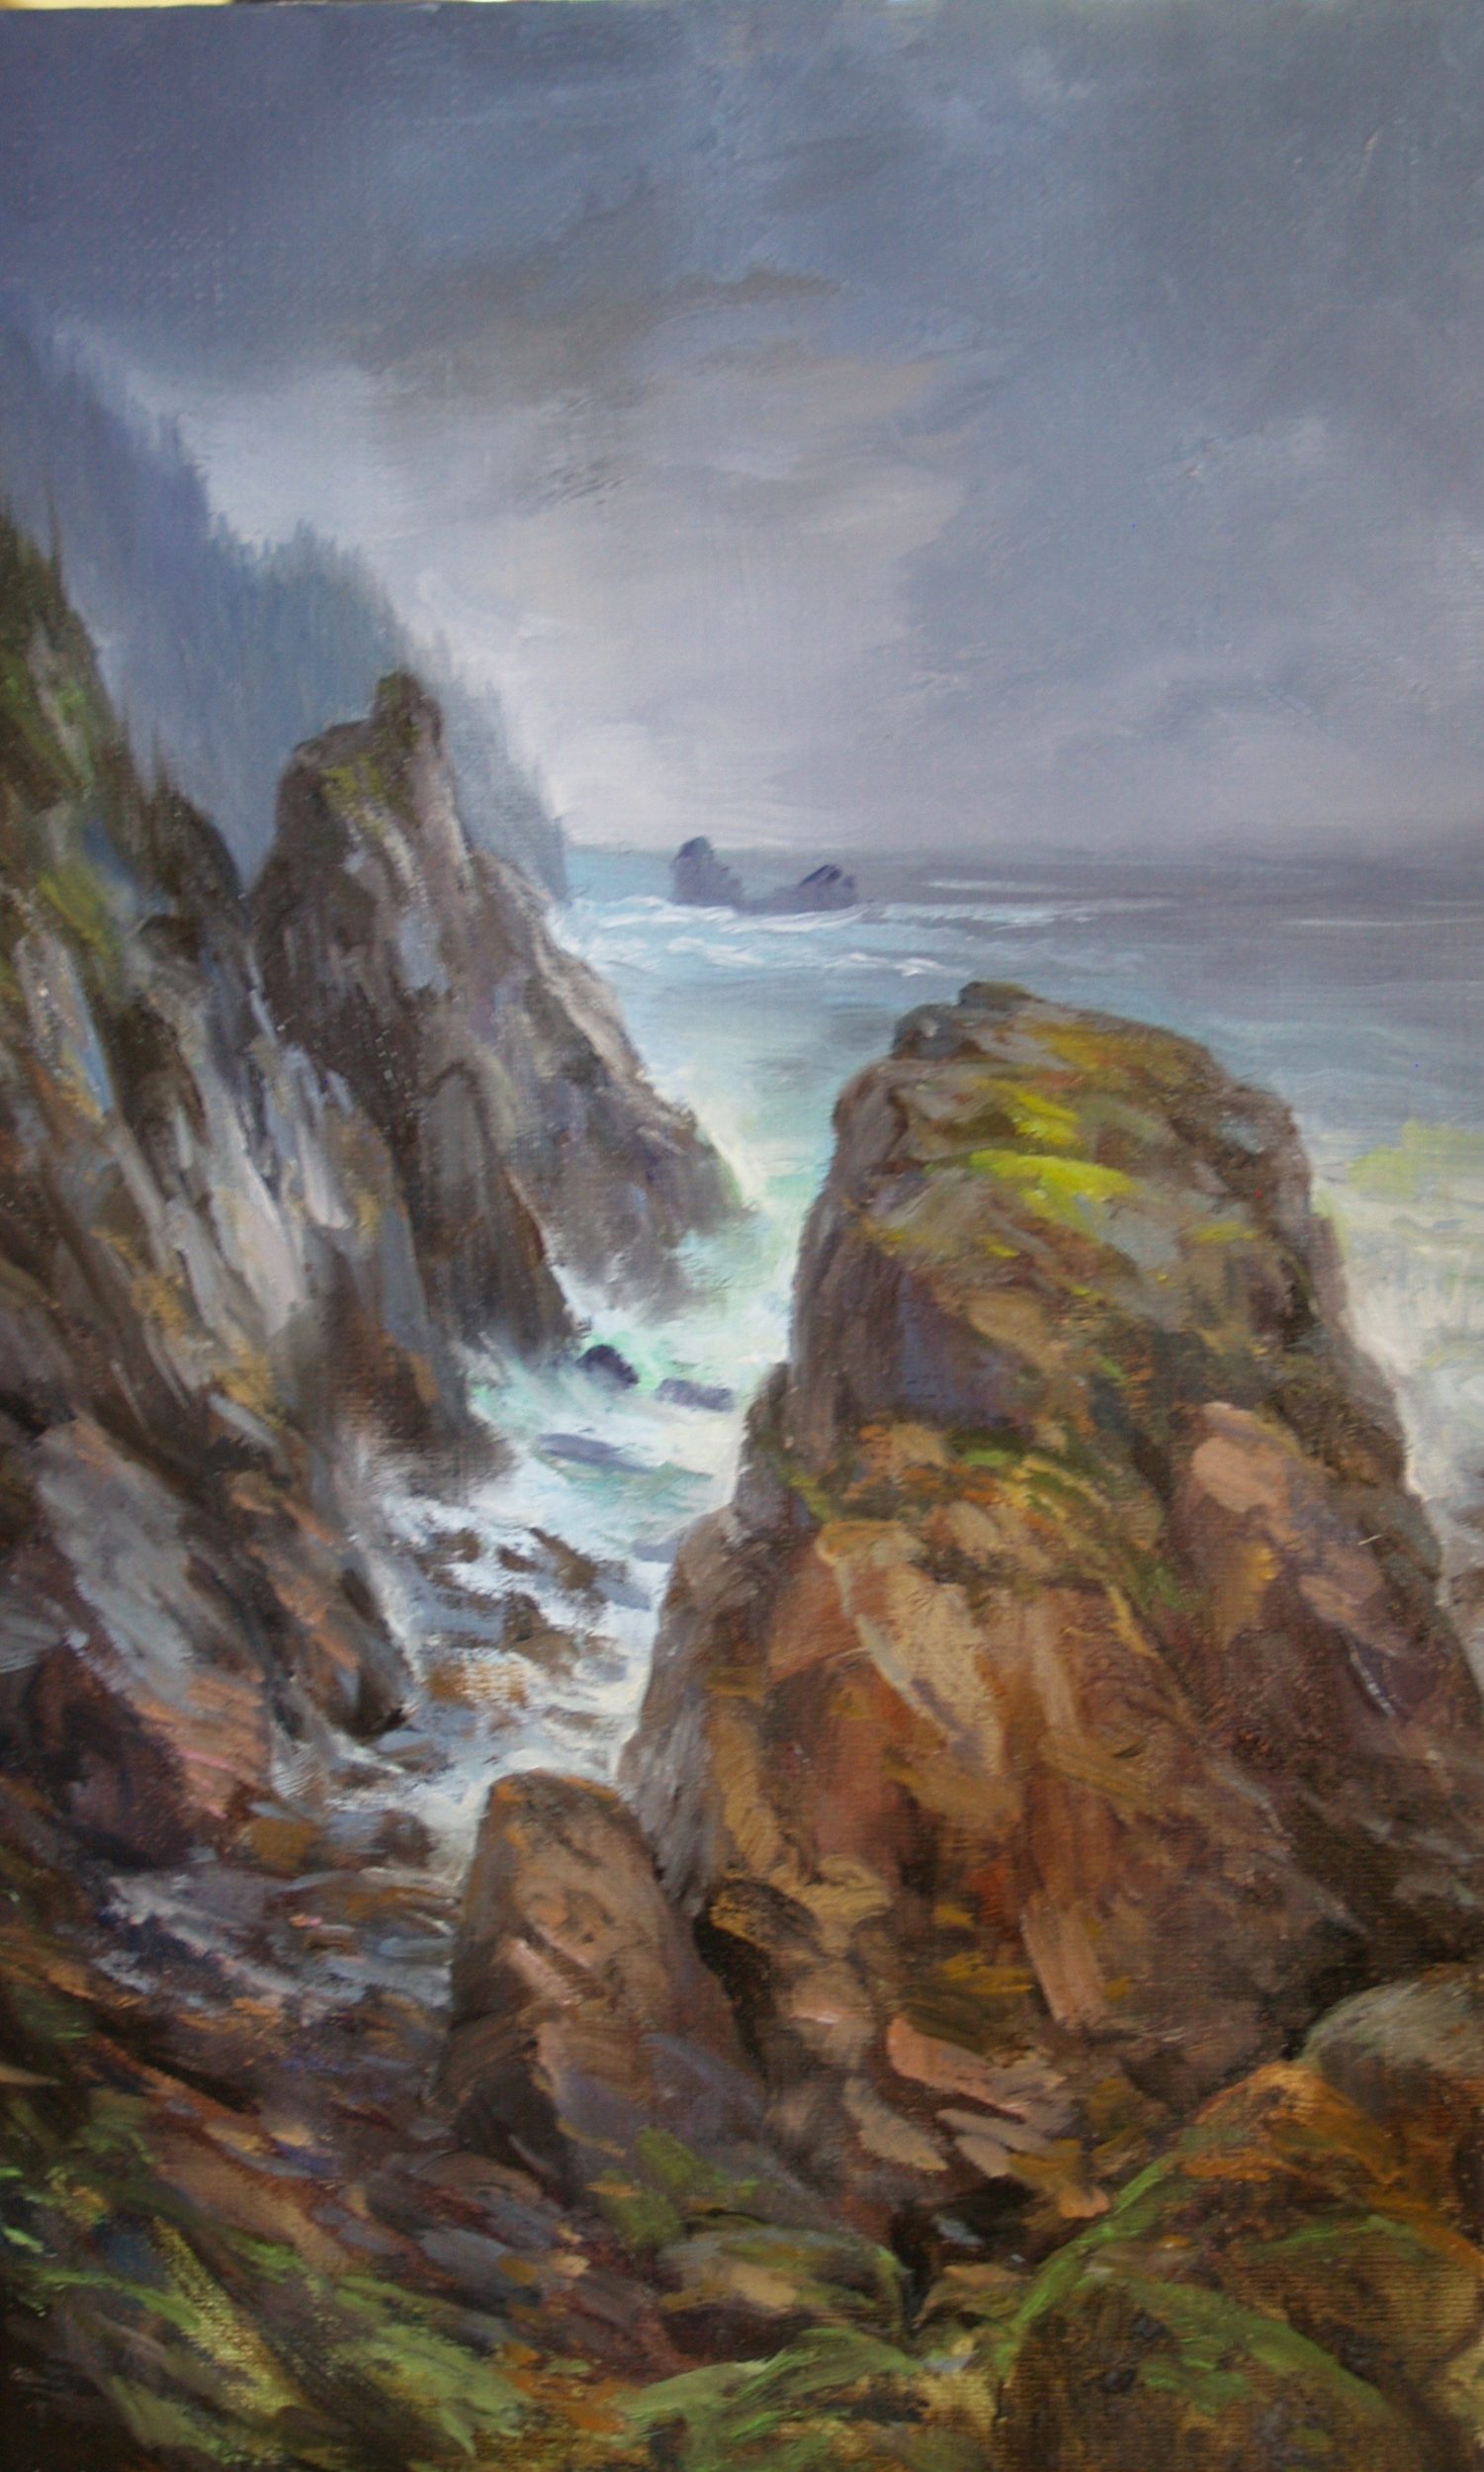 This is an oil painting by Stefan Baumann of Whaler's Cove located in Point Lobos National Park of a scene of the ocean on a rocky shore on a foggy day.